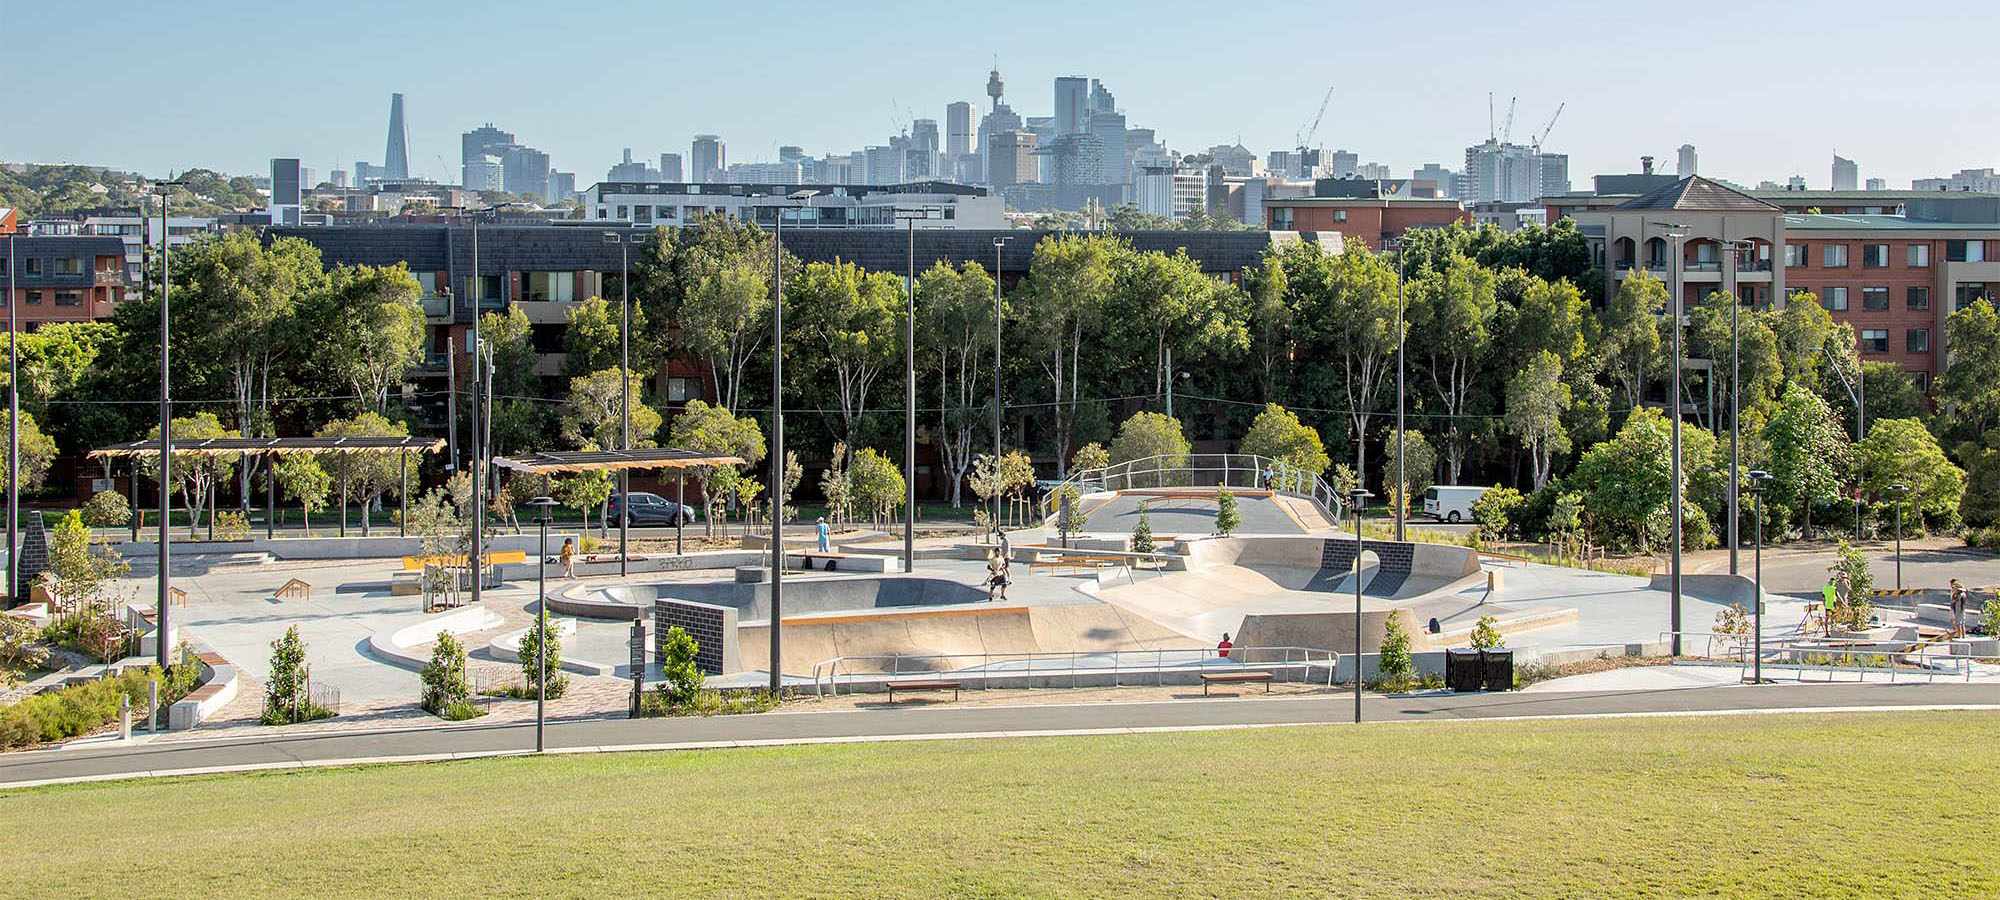 Sydney Park skate park at Alexandria with the Sydney CBD in the background. Credit: NSW Department of Planning and Environment